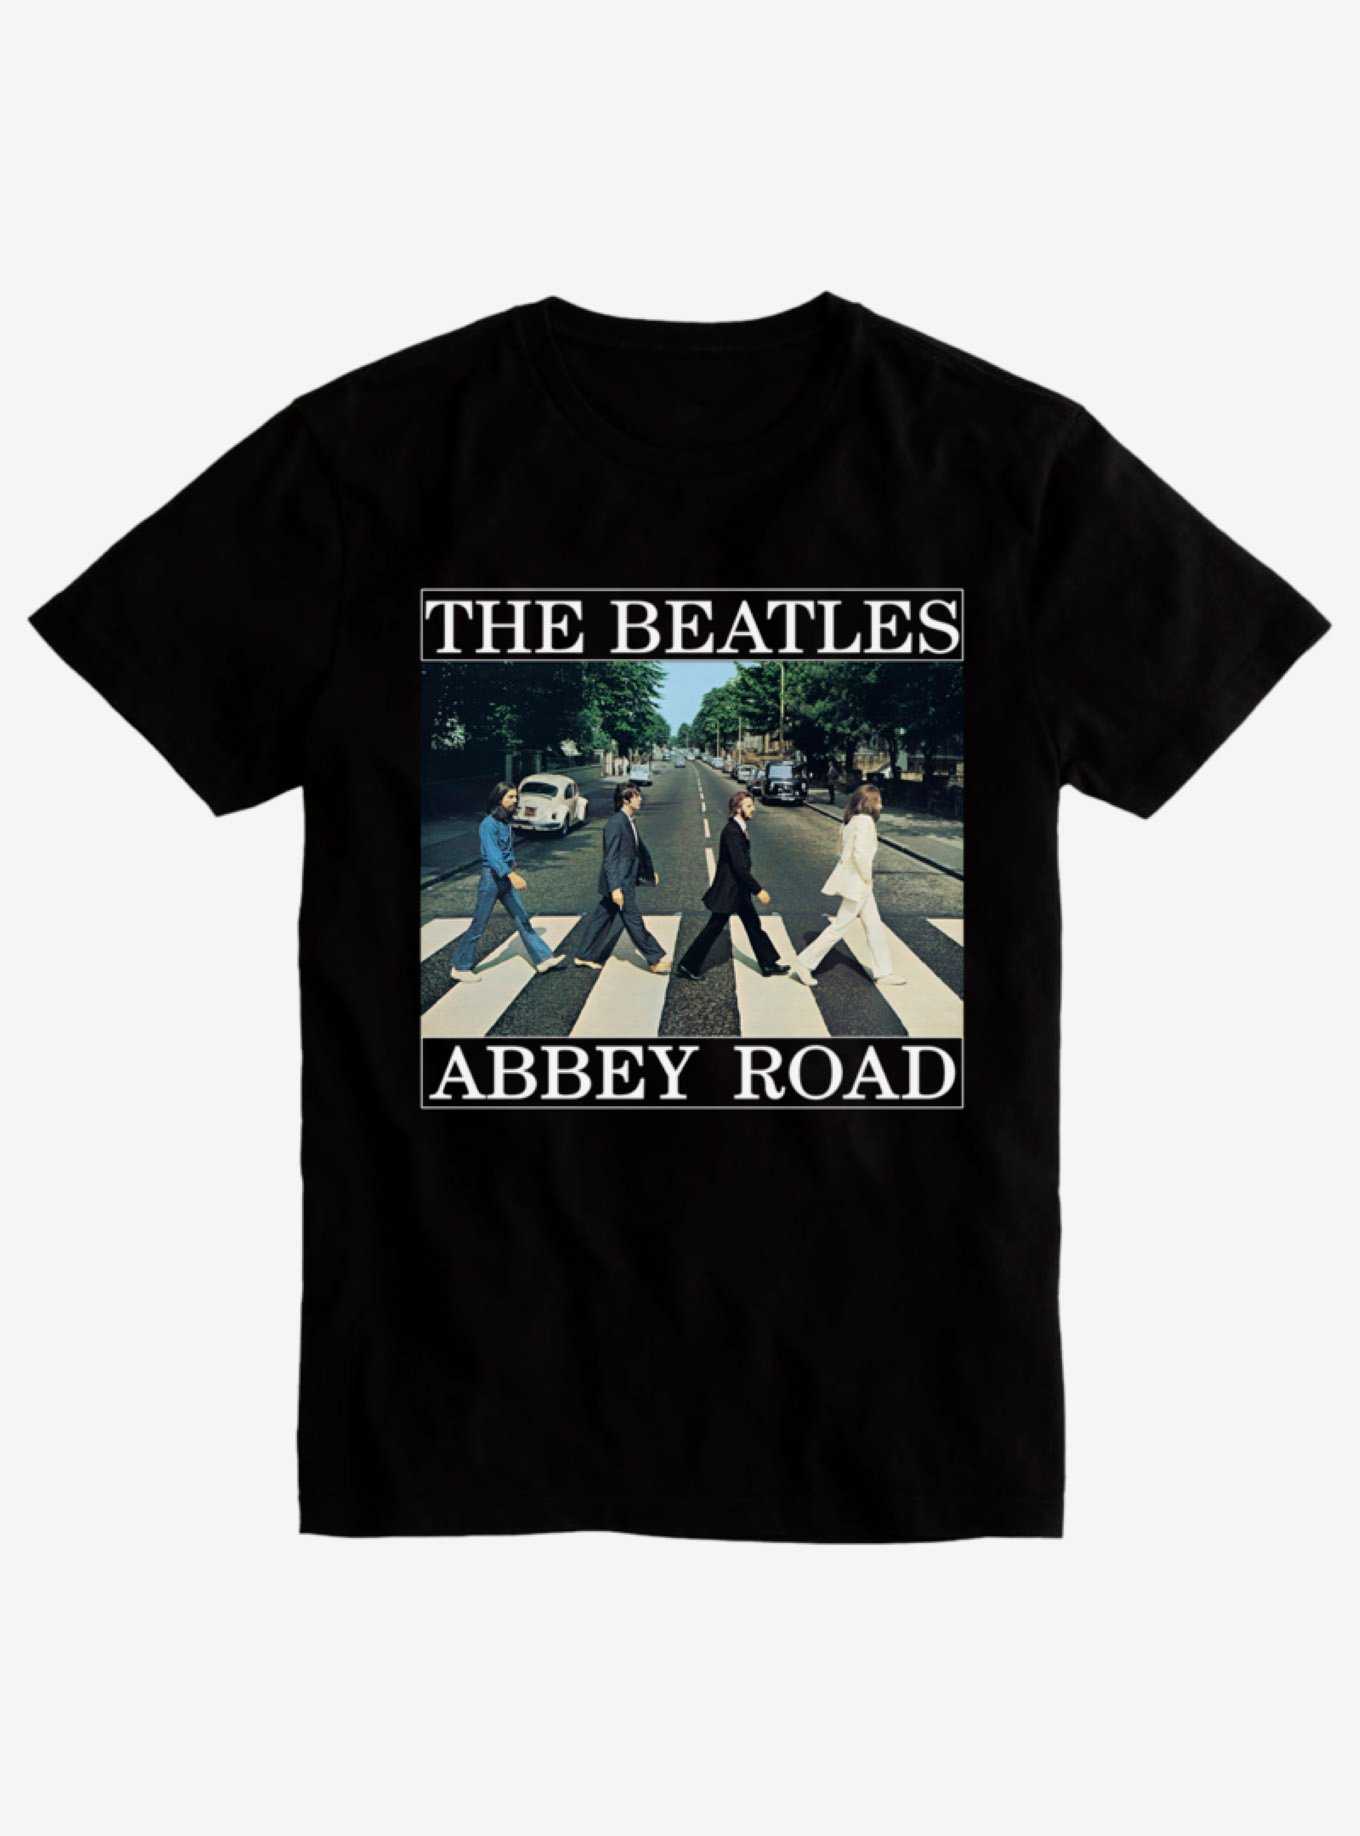 The Beatles Abbey Road Hot Topic Cover T-Shirt Album 